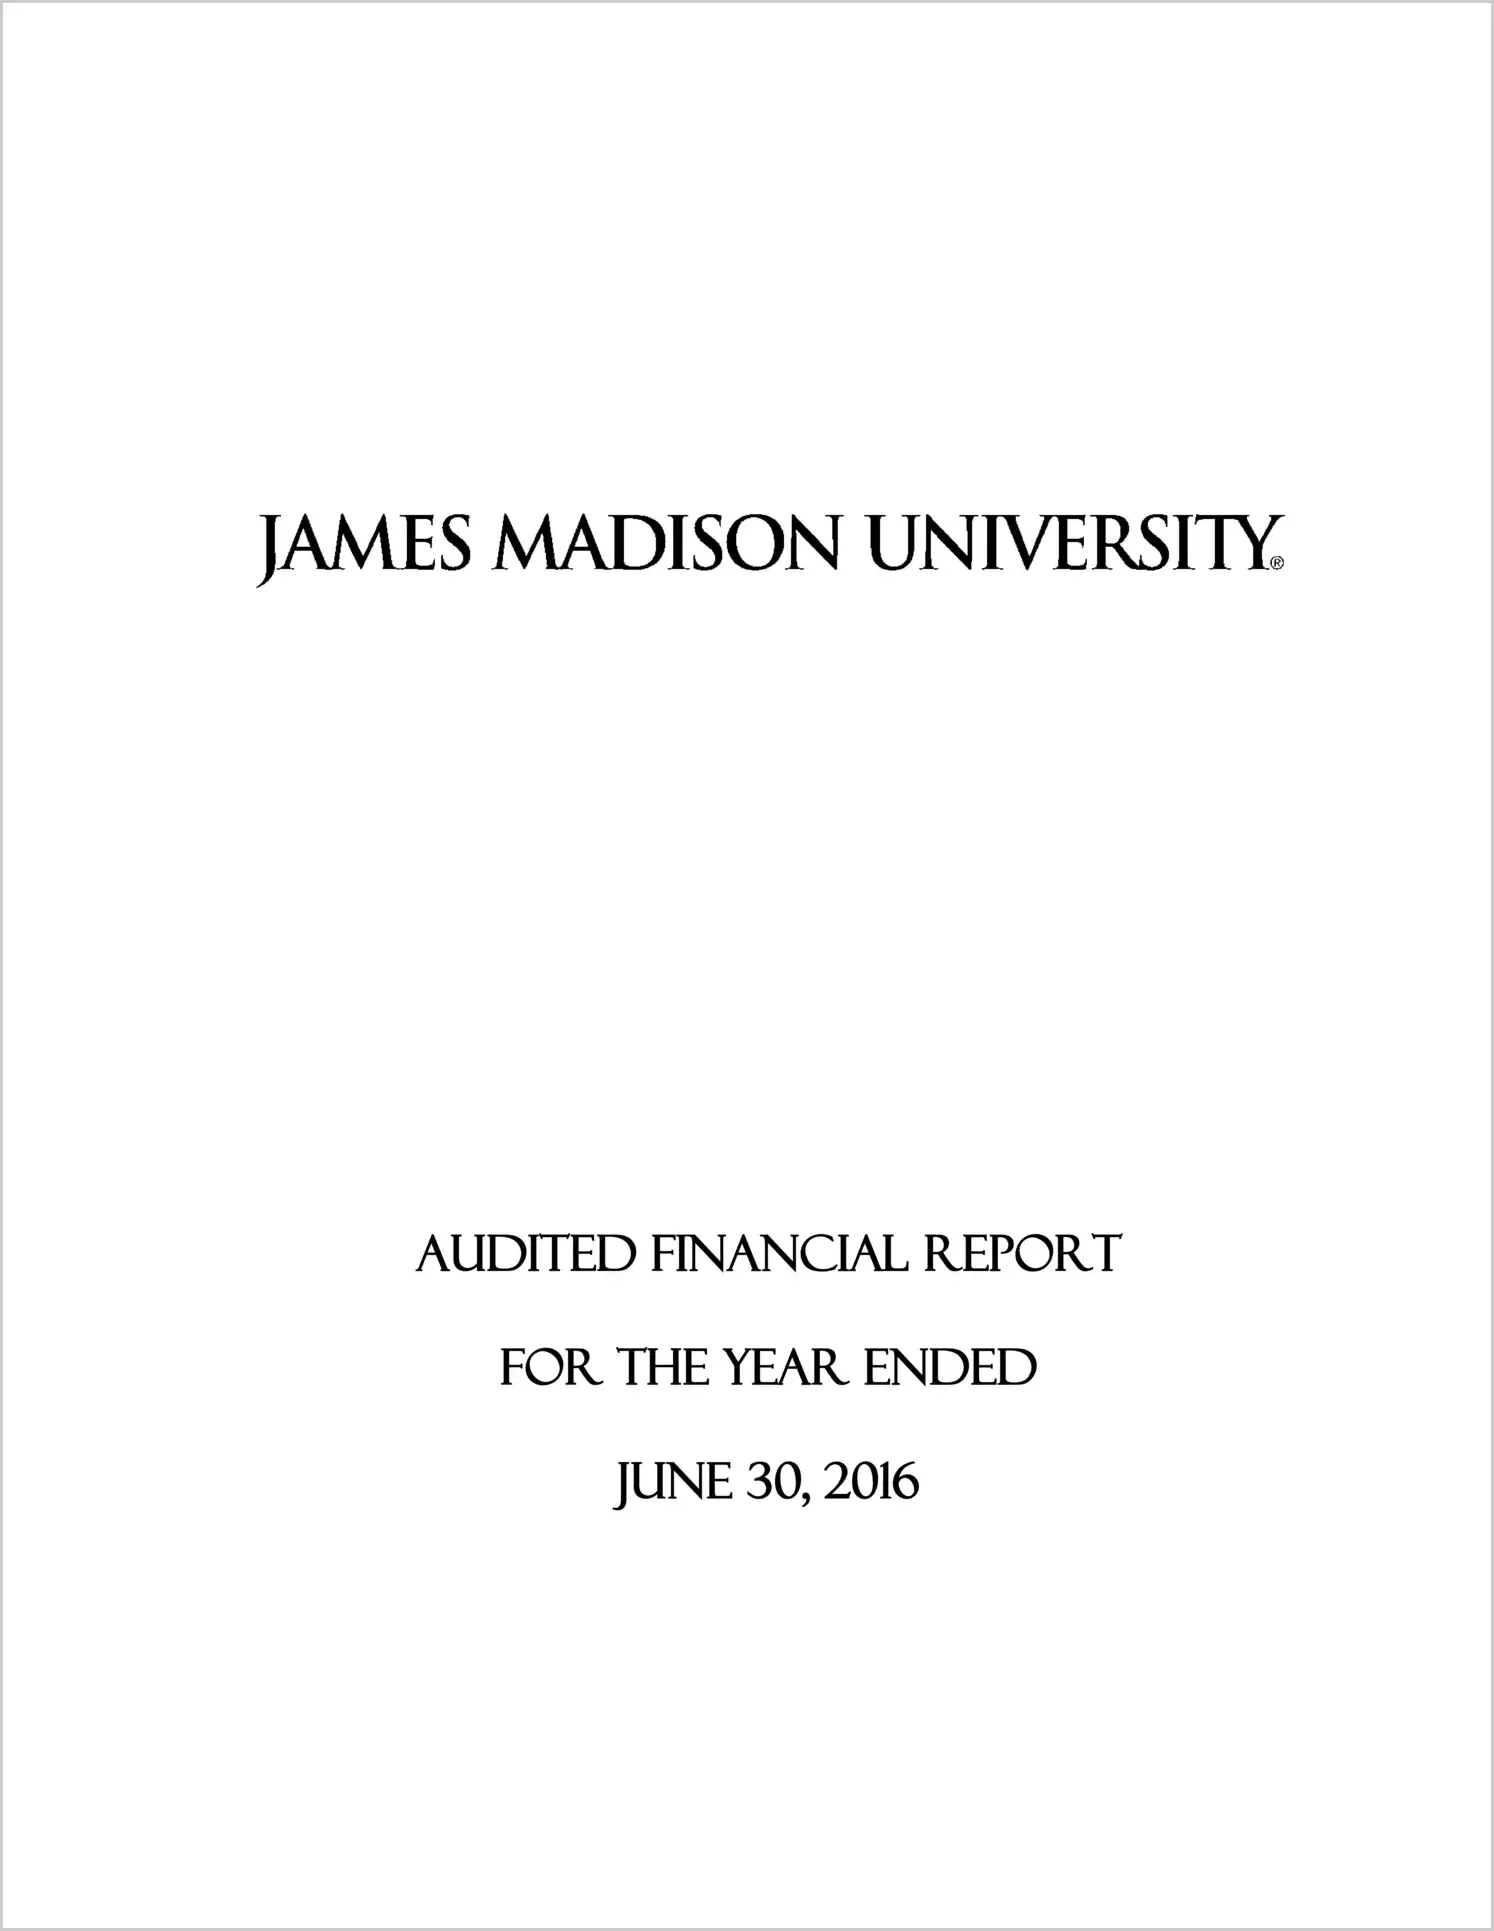 James Madison University Financial Statements for the year ended June 30, 2016